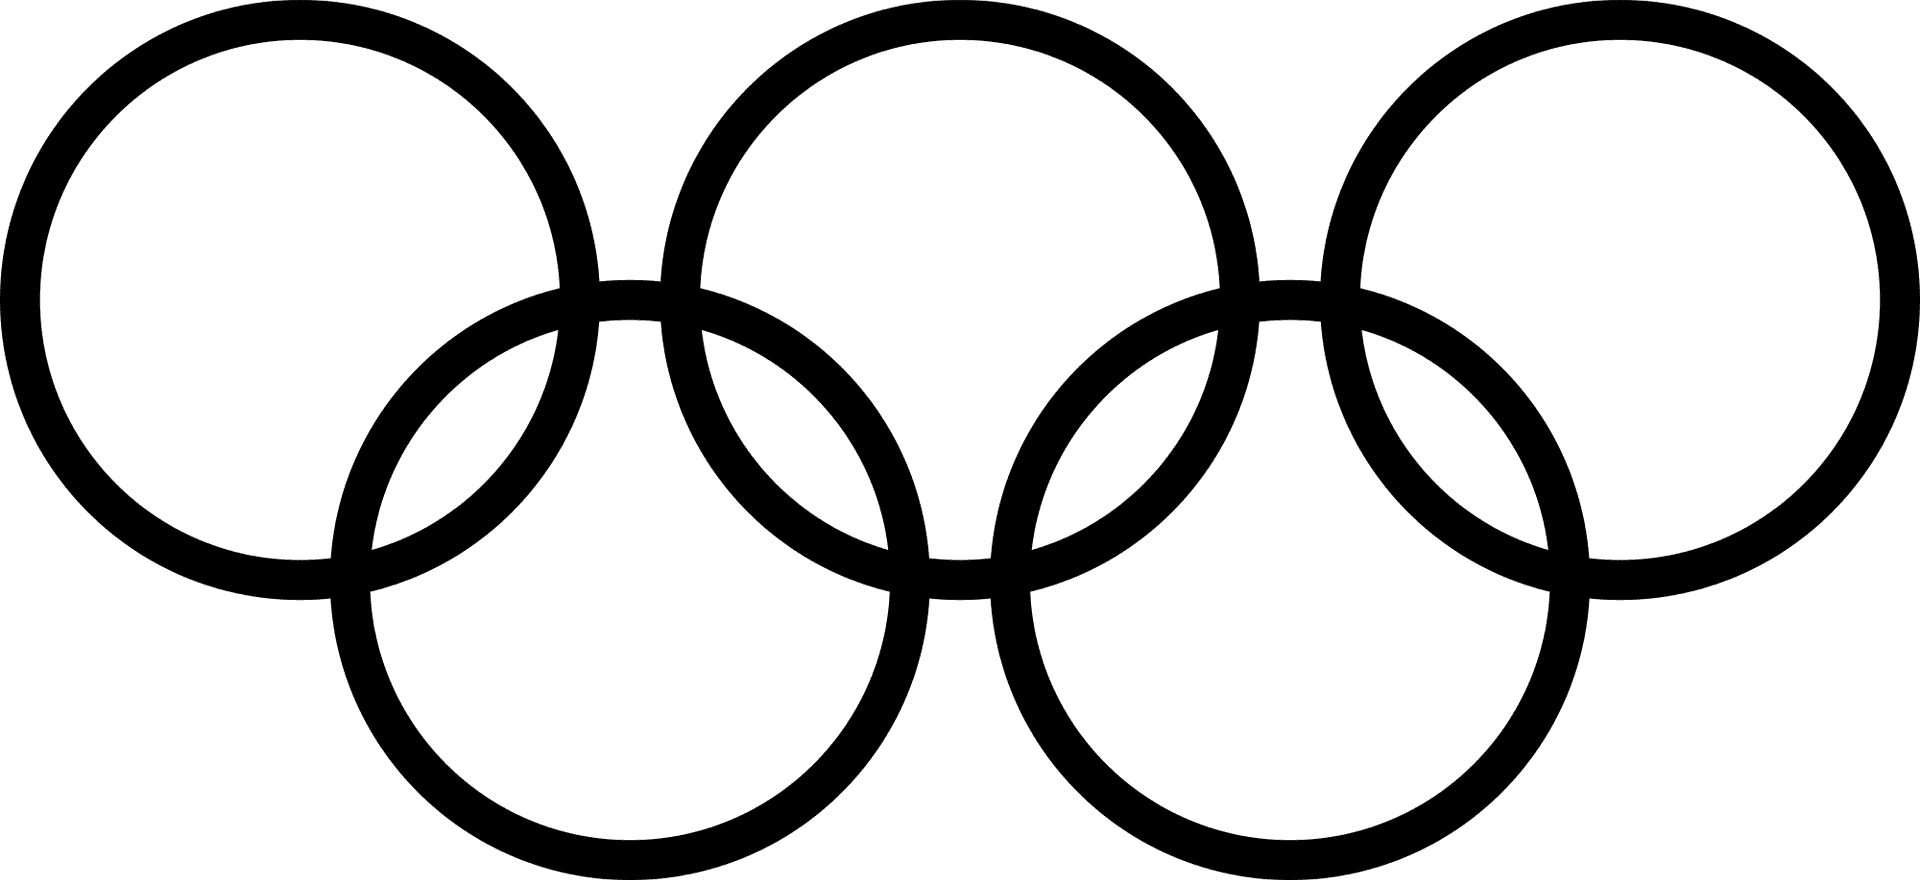 Olympic_ Rings_ Symbol_ Black_and_ White PNG image